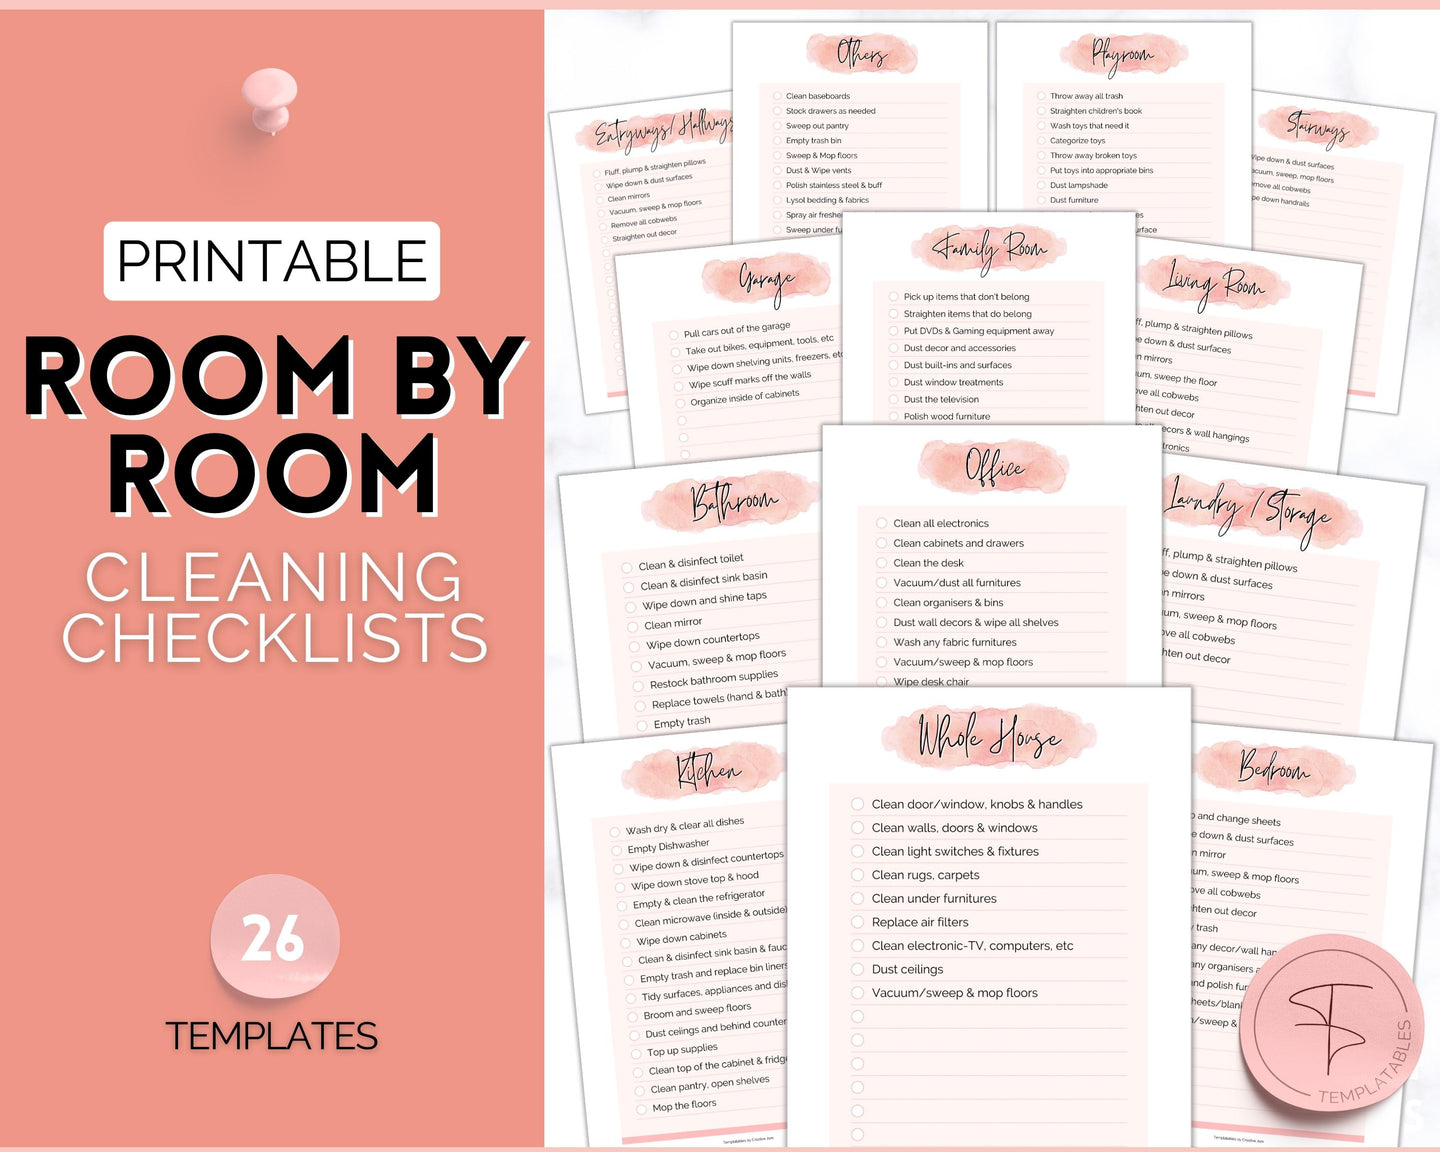 Cleaning Checklist, Printable Room by room Cleaning Cards | Family & Kids Cleaning Schedule Planner & Tracker | Pink Watercolor